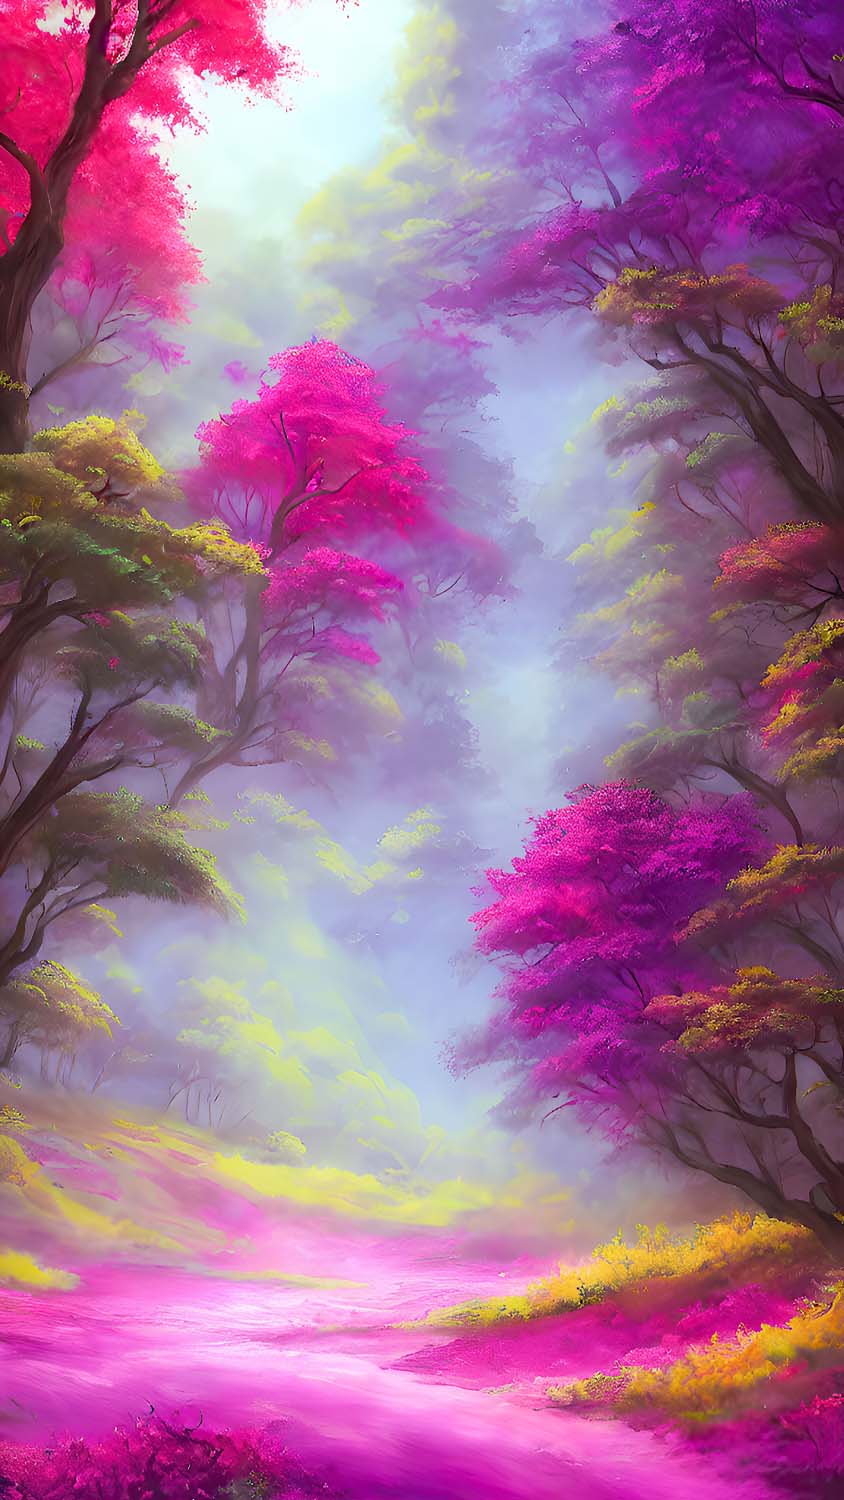 Forest Scenery Painting iPhone Wallpaper HD